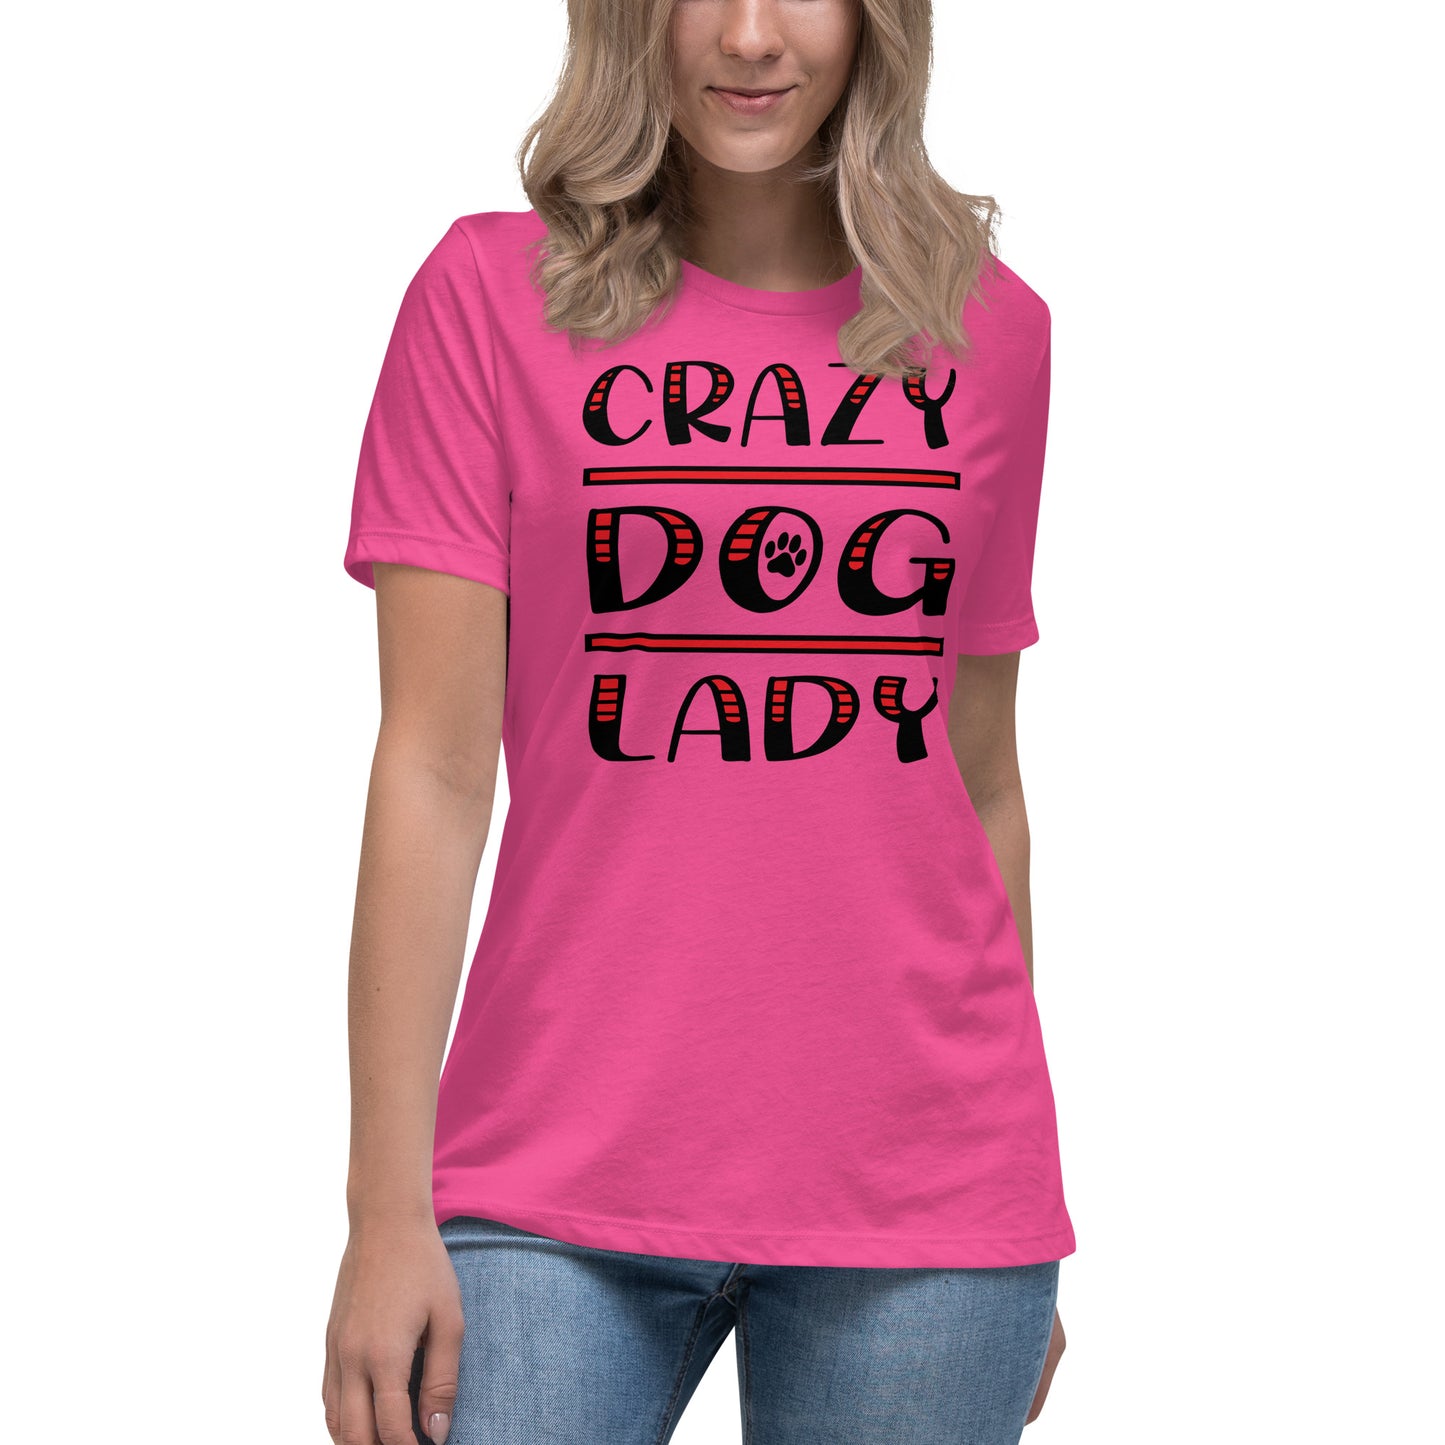 Crazy Dog Lady Women's Berry T-Shirt by Dog Artistry 